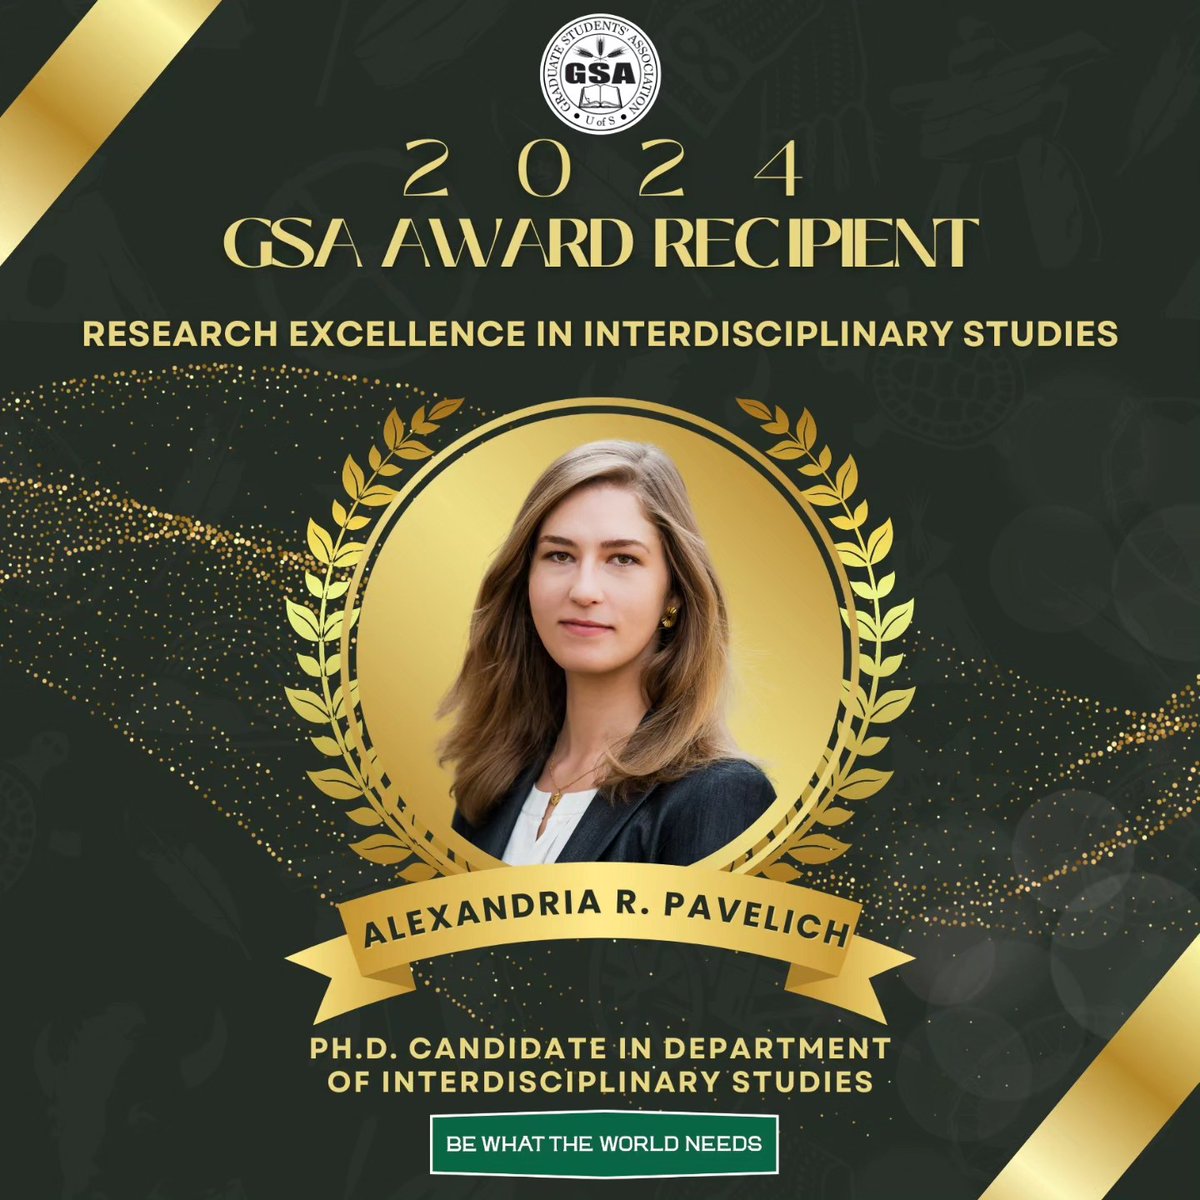 Very excited to receive this recognition from @GSA_USask @UofSCGPS @usask - the 2024 Award Recipient for Research Excellence in Interdisciplinary Studies! Thank you to my incredible mentors @ColleenAnneDell & @docstemp for their nomination and on-going support of AAI research